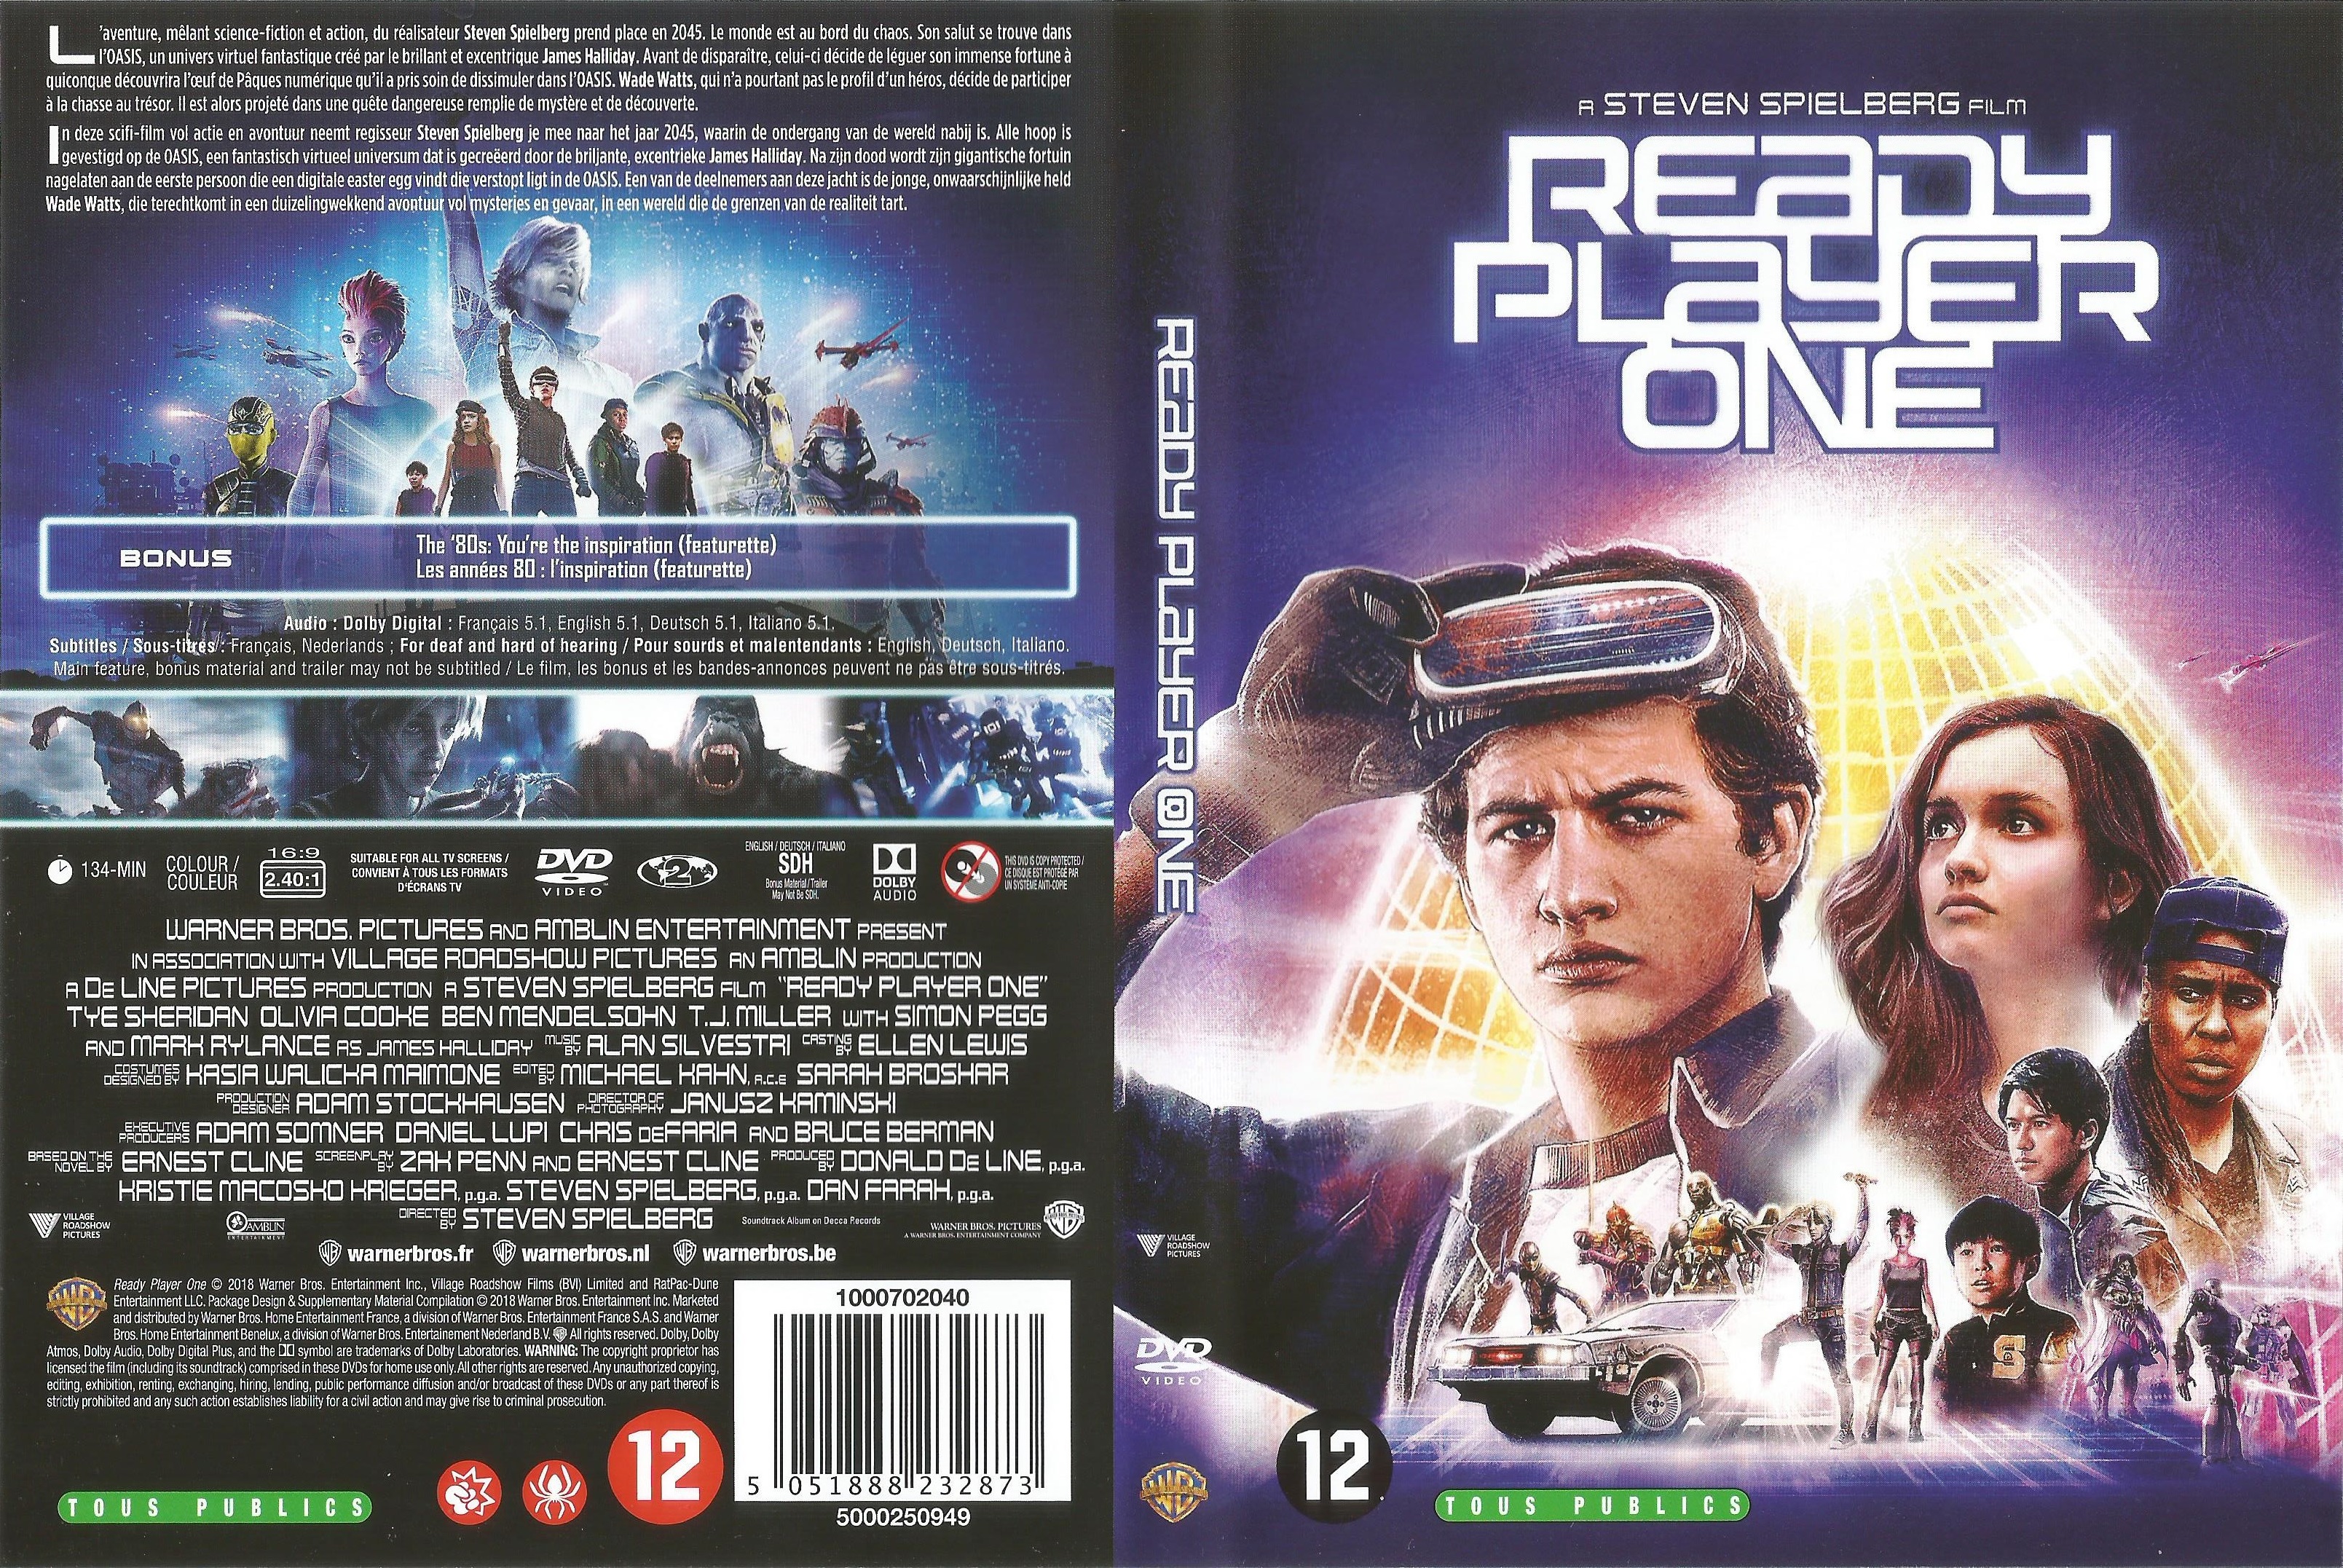 Jaquette DVD Ready Player One